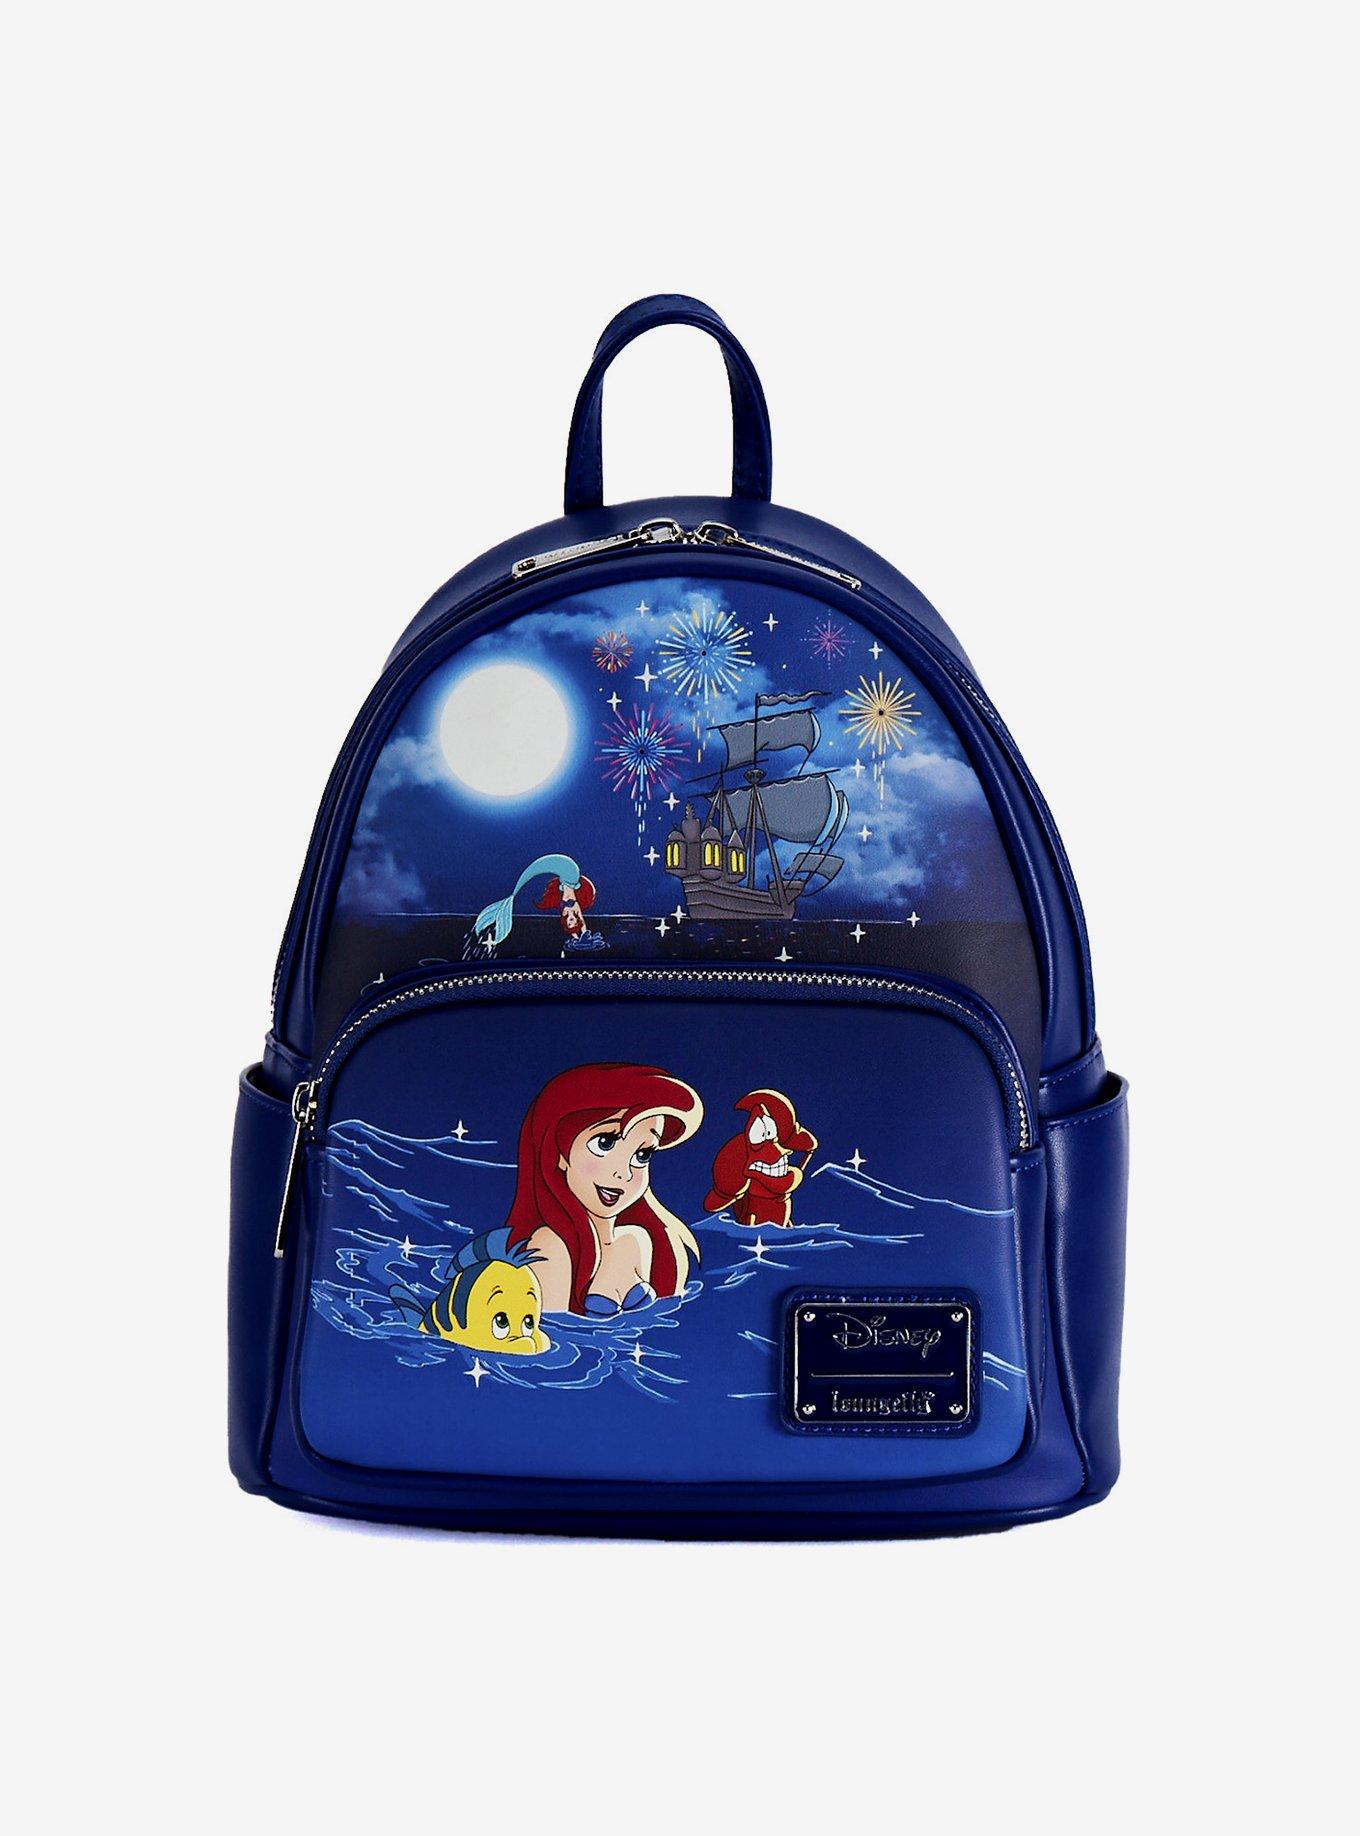 Ariel Sequined Mini Backpack by Loungefly – The Little Mermaid